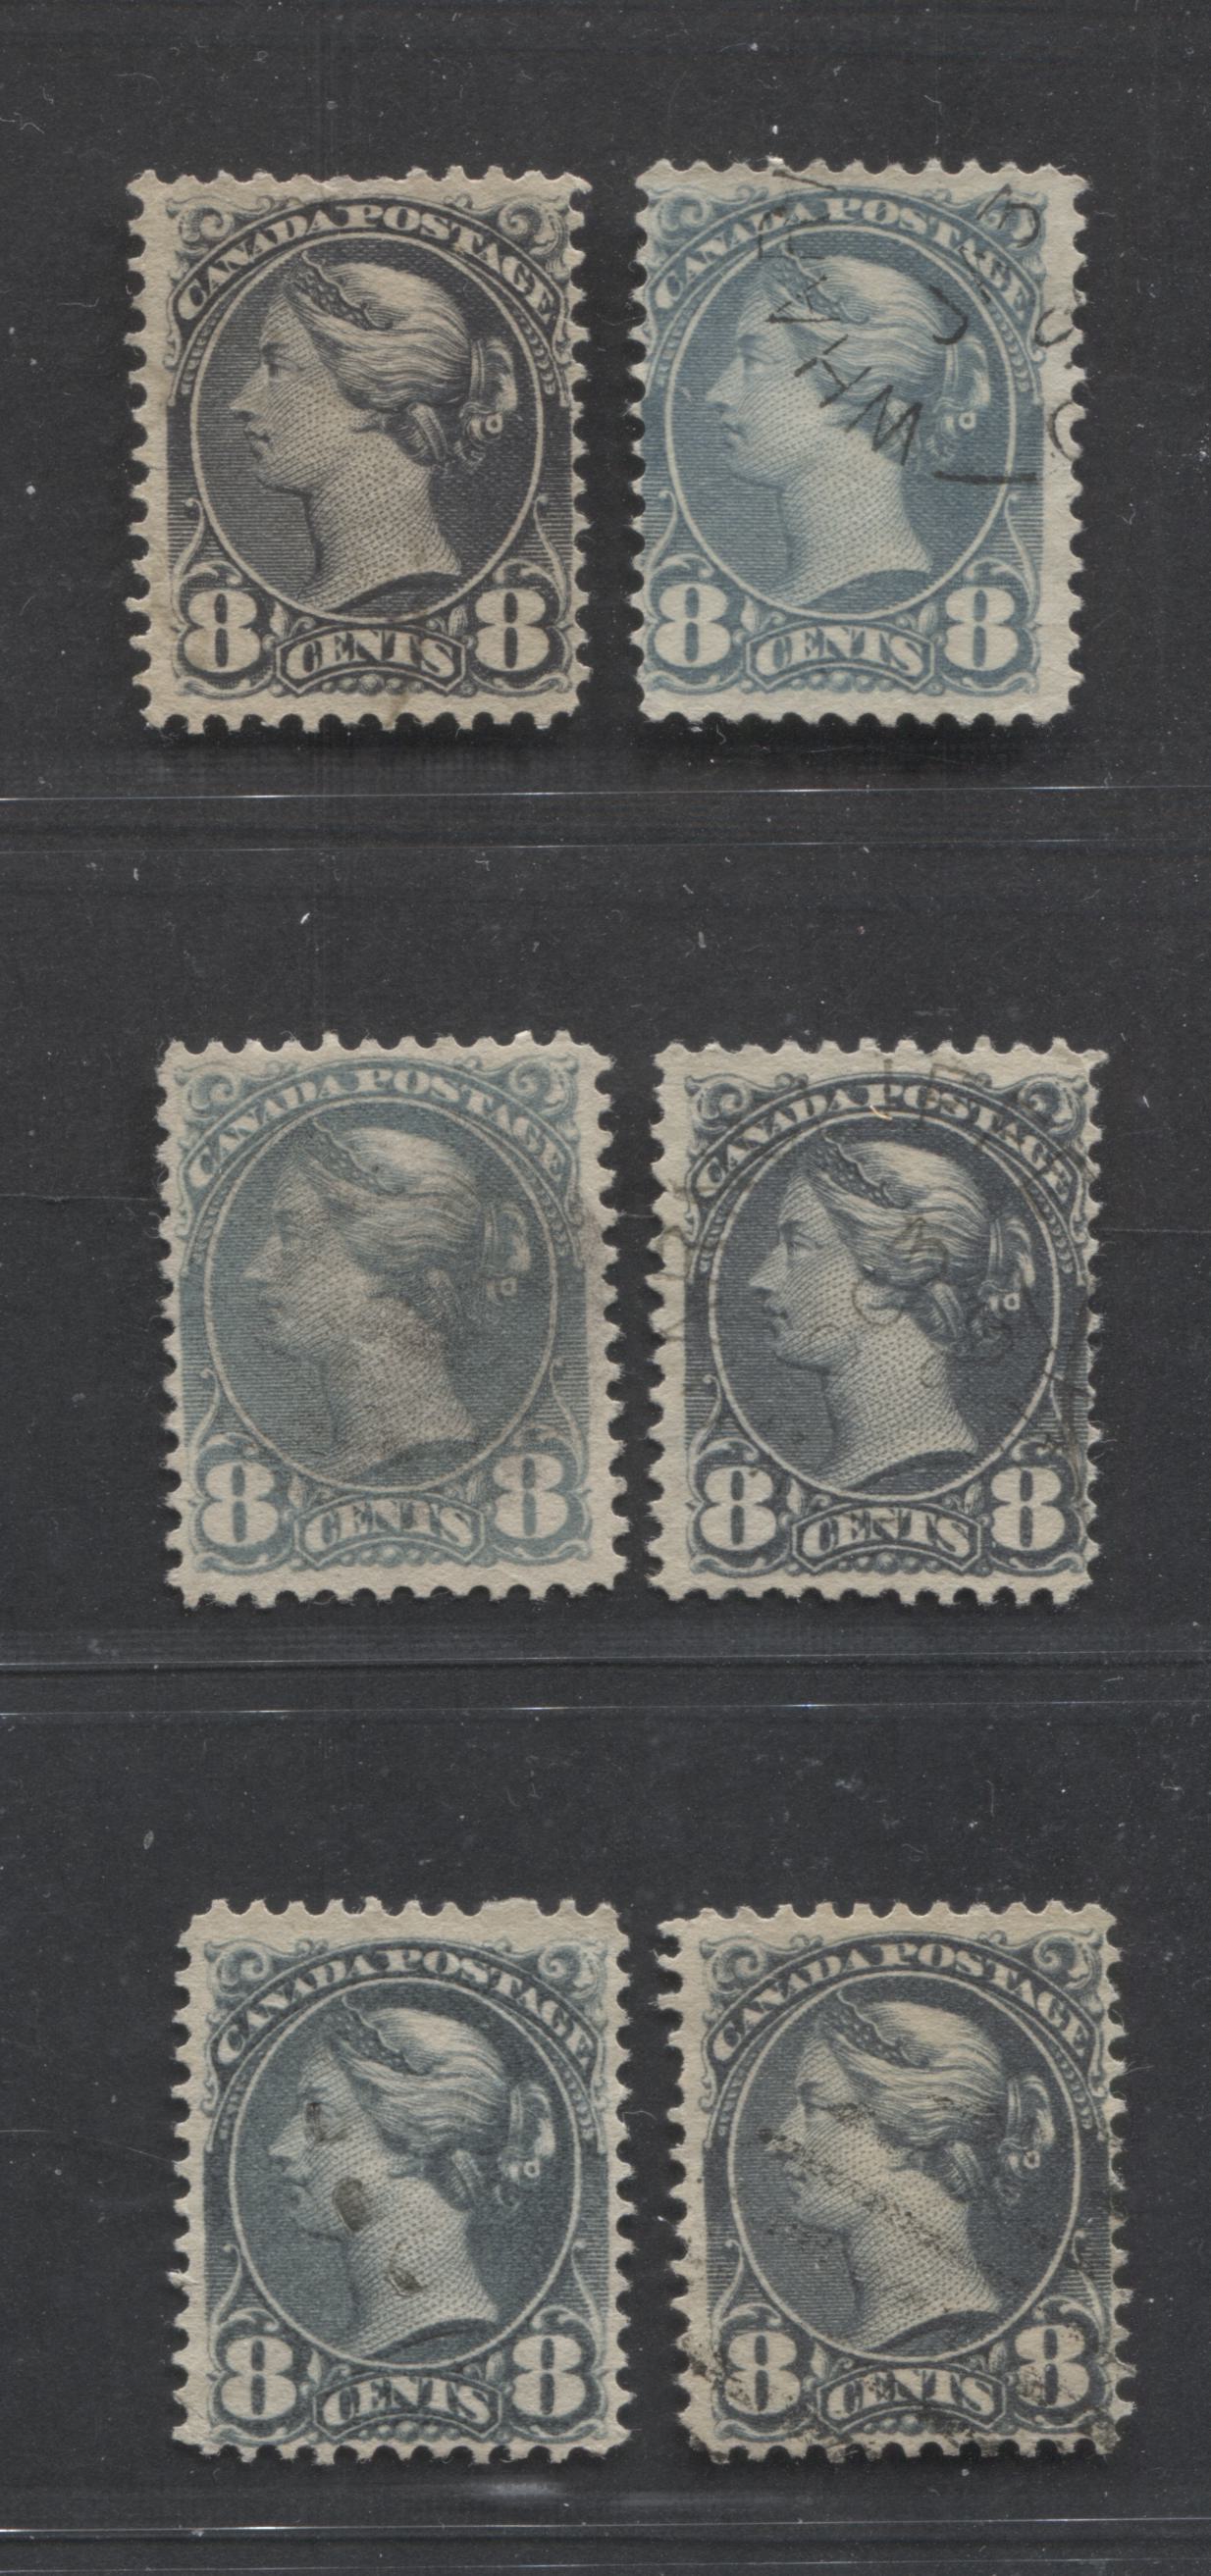 Lot 237 Canada #44-44c 8c Violet Black, Blue Grey, Grey, and  Slate Queen Victoria, 1870-1897 Small Queen Issue, 6 Fine Used Singles, Nearly Covering the Full Listed Range of Shades